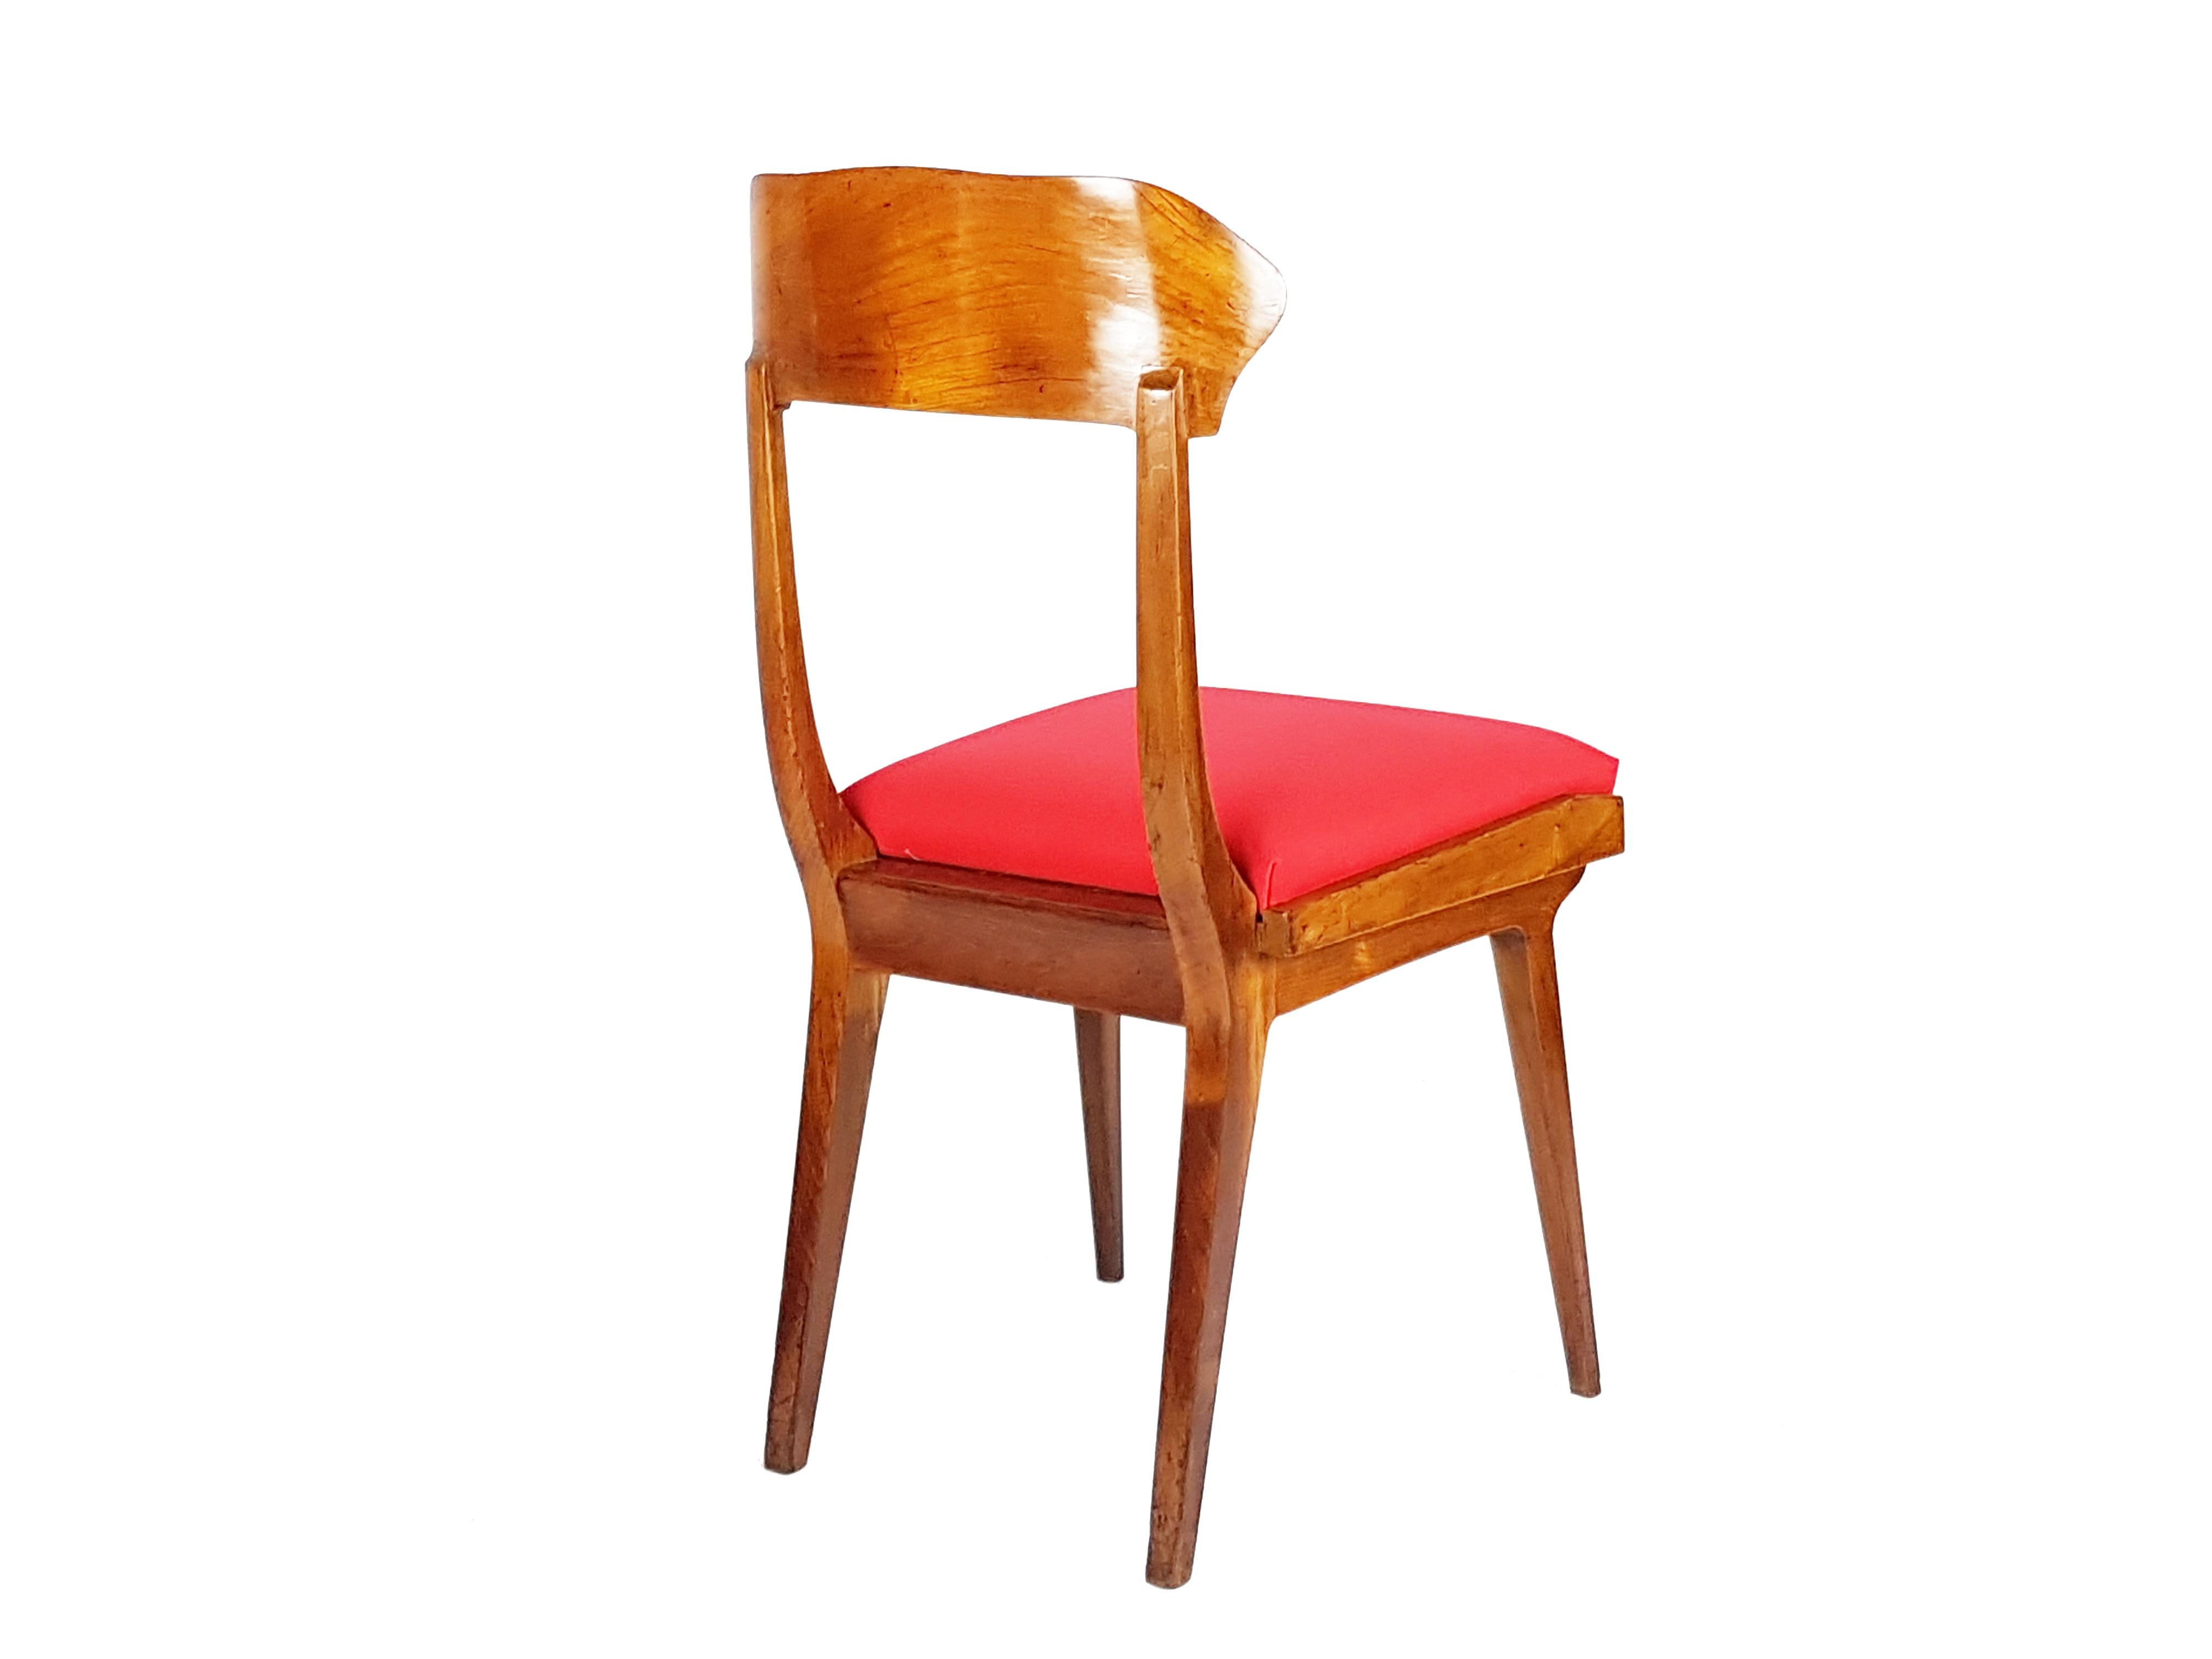 Italian Midcentury Wood and Red Fabric Side Chairs from Fratelli Barni Mobili d'Arte For Sale